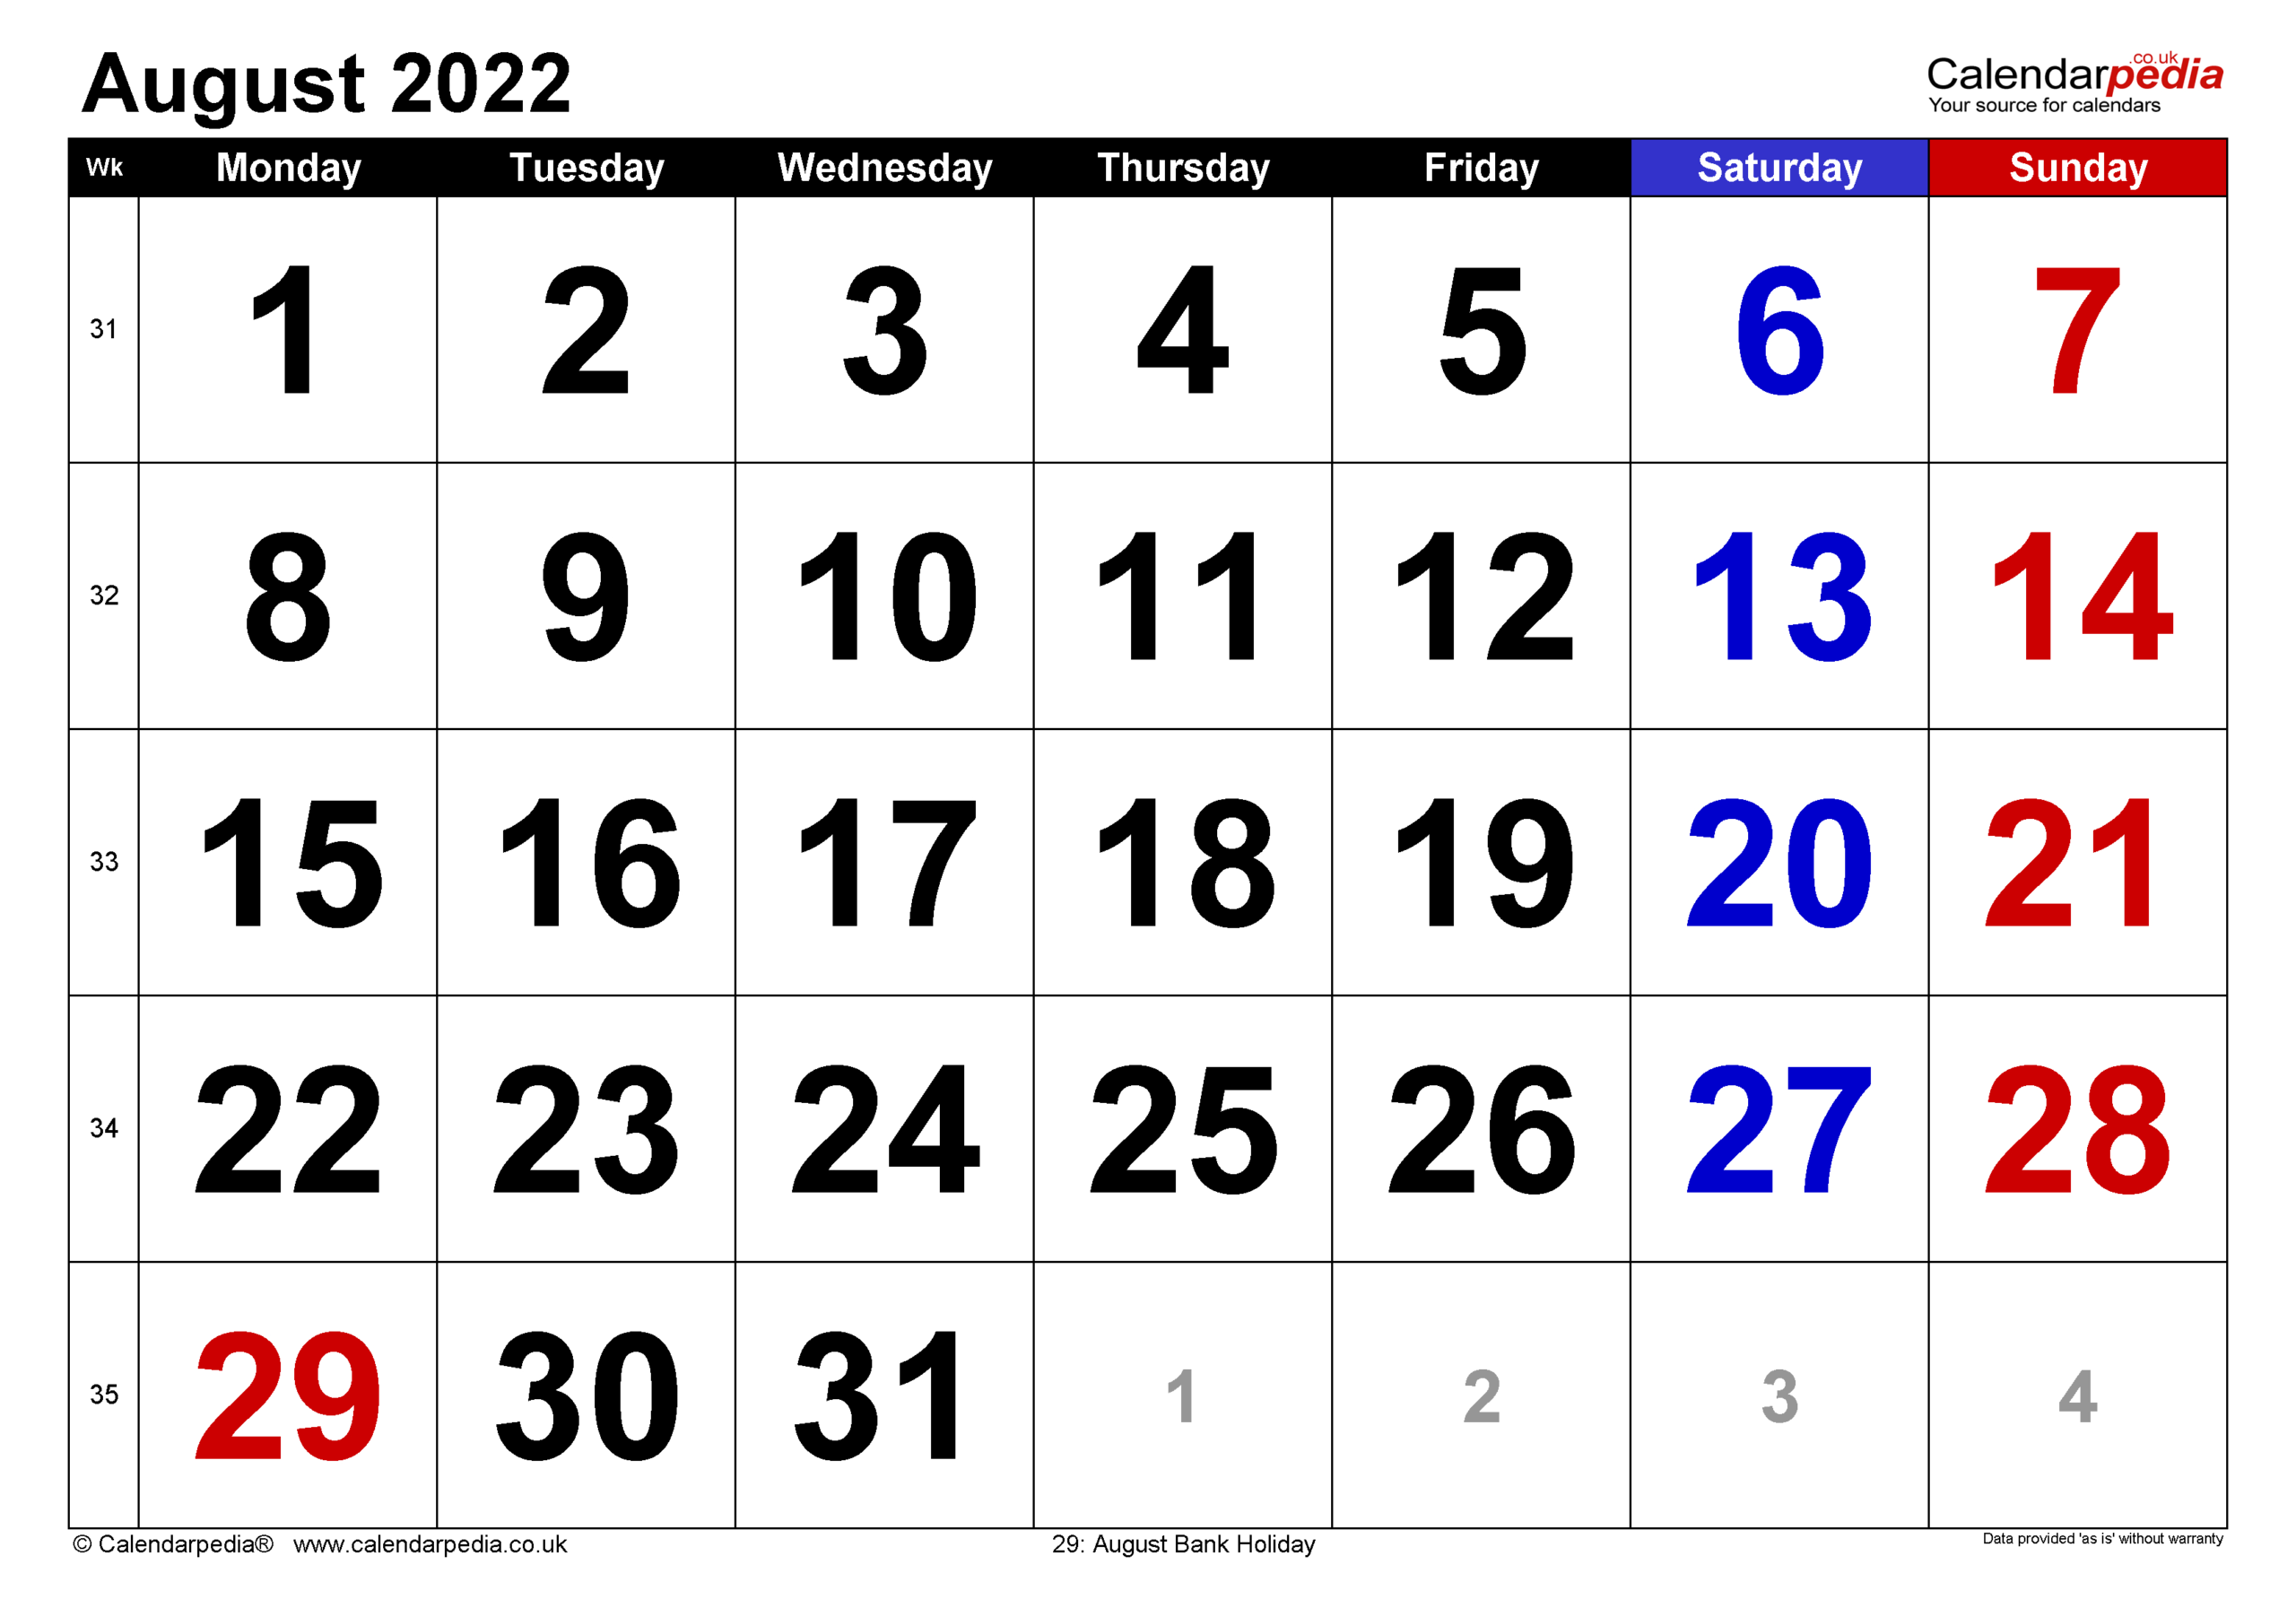 Calendar August 2022 Uk With Excel, Word And Pdf Templates-2022 Calendar With Holidays Uk